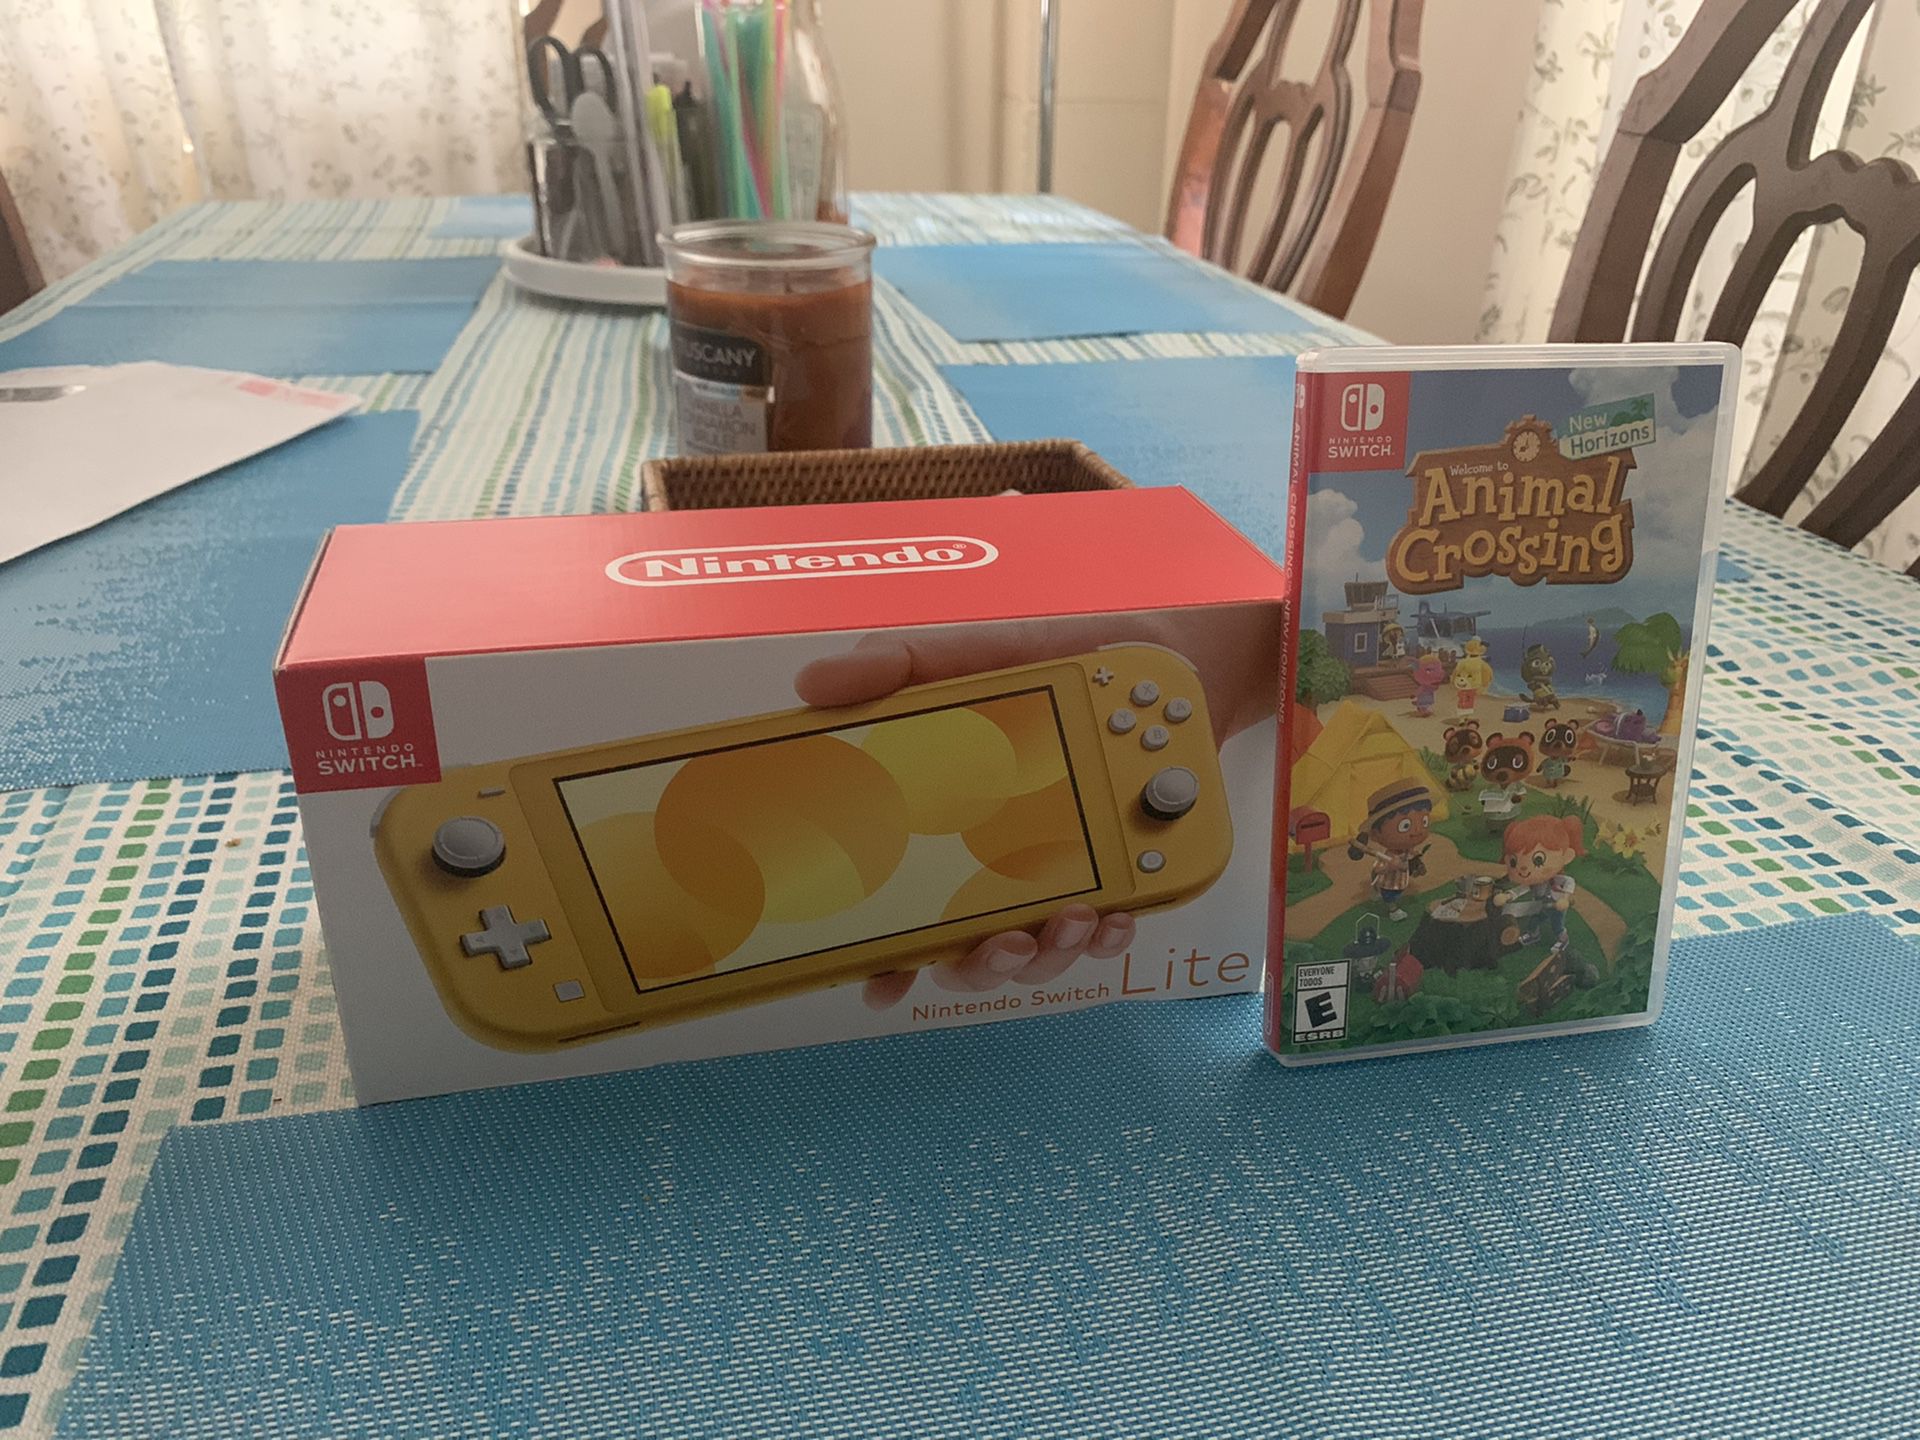 Nintendo Switch Lite DOES NOT INCLUDE ANIMAL CROSSING